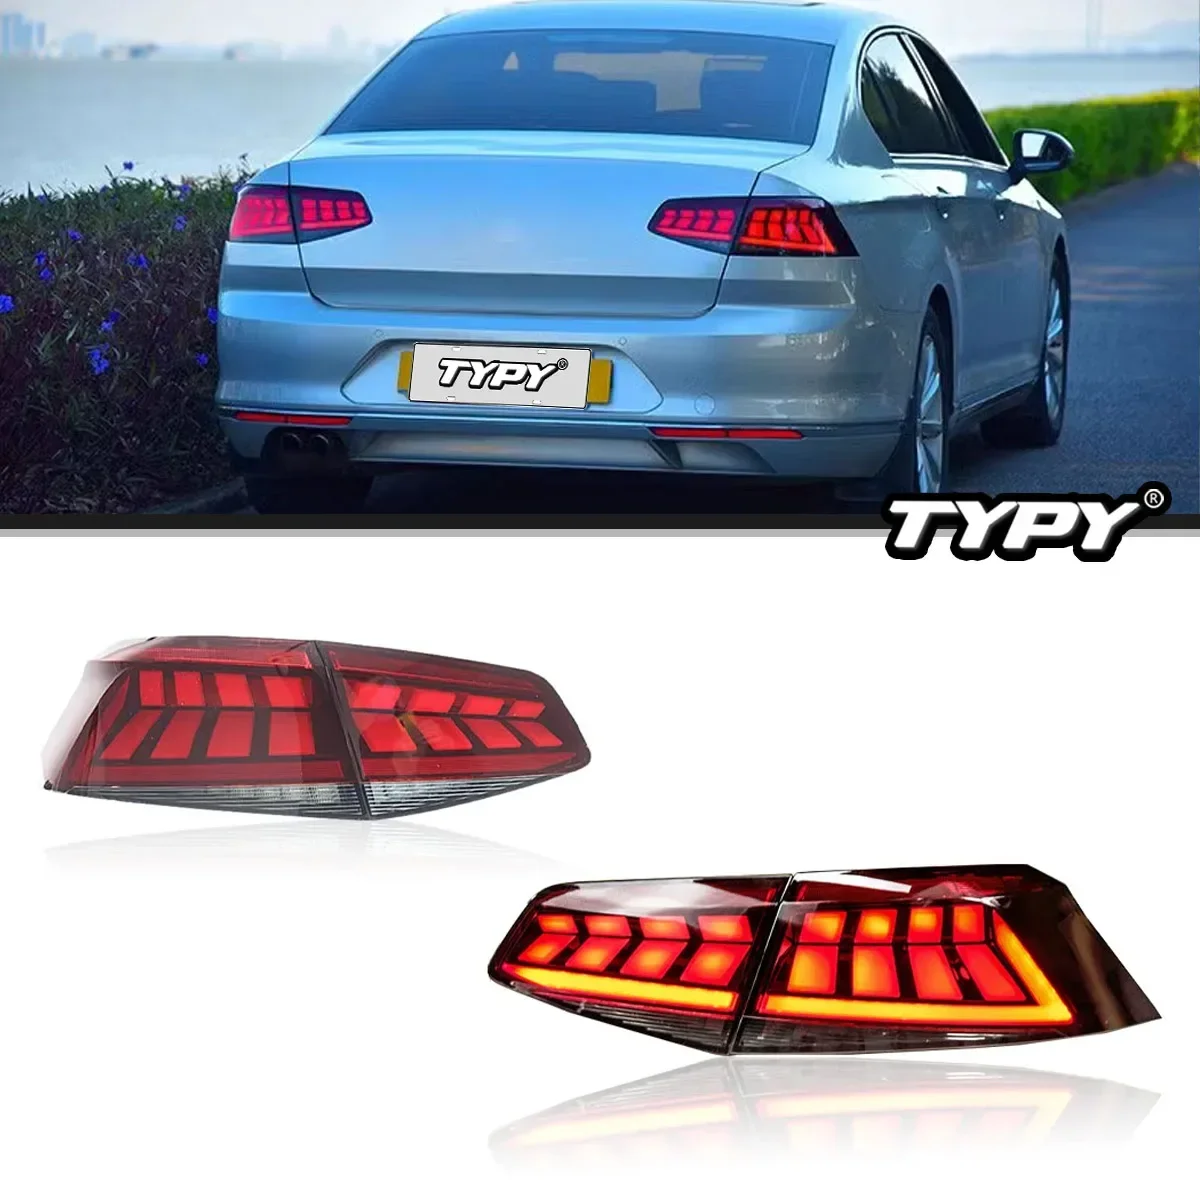 

TYPY Car Tail Lights For Ford VW Passat B8 2015-2019 LED Car Tail Lamps Daytime Running Lights Dynamic Turn Signals